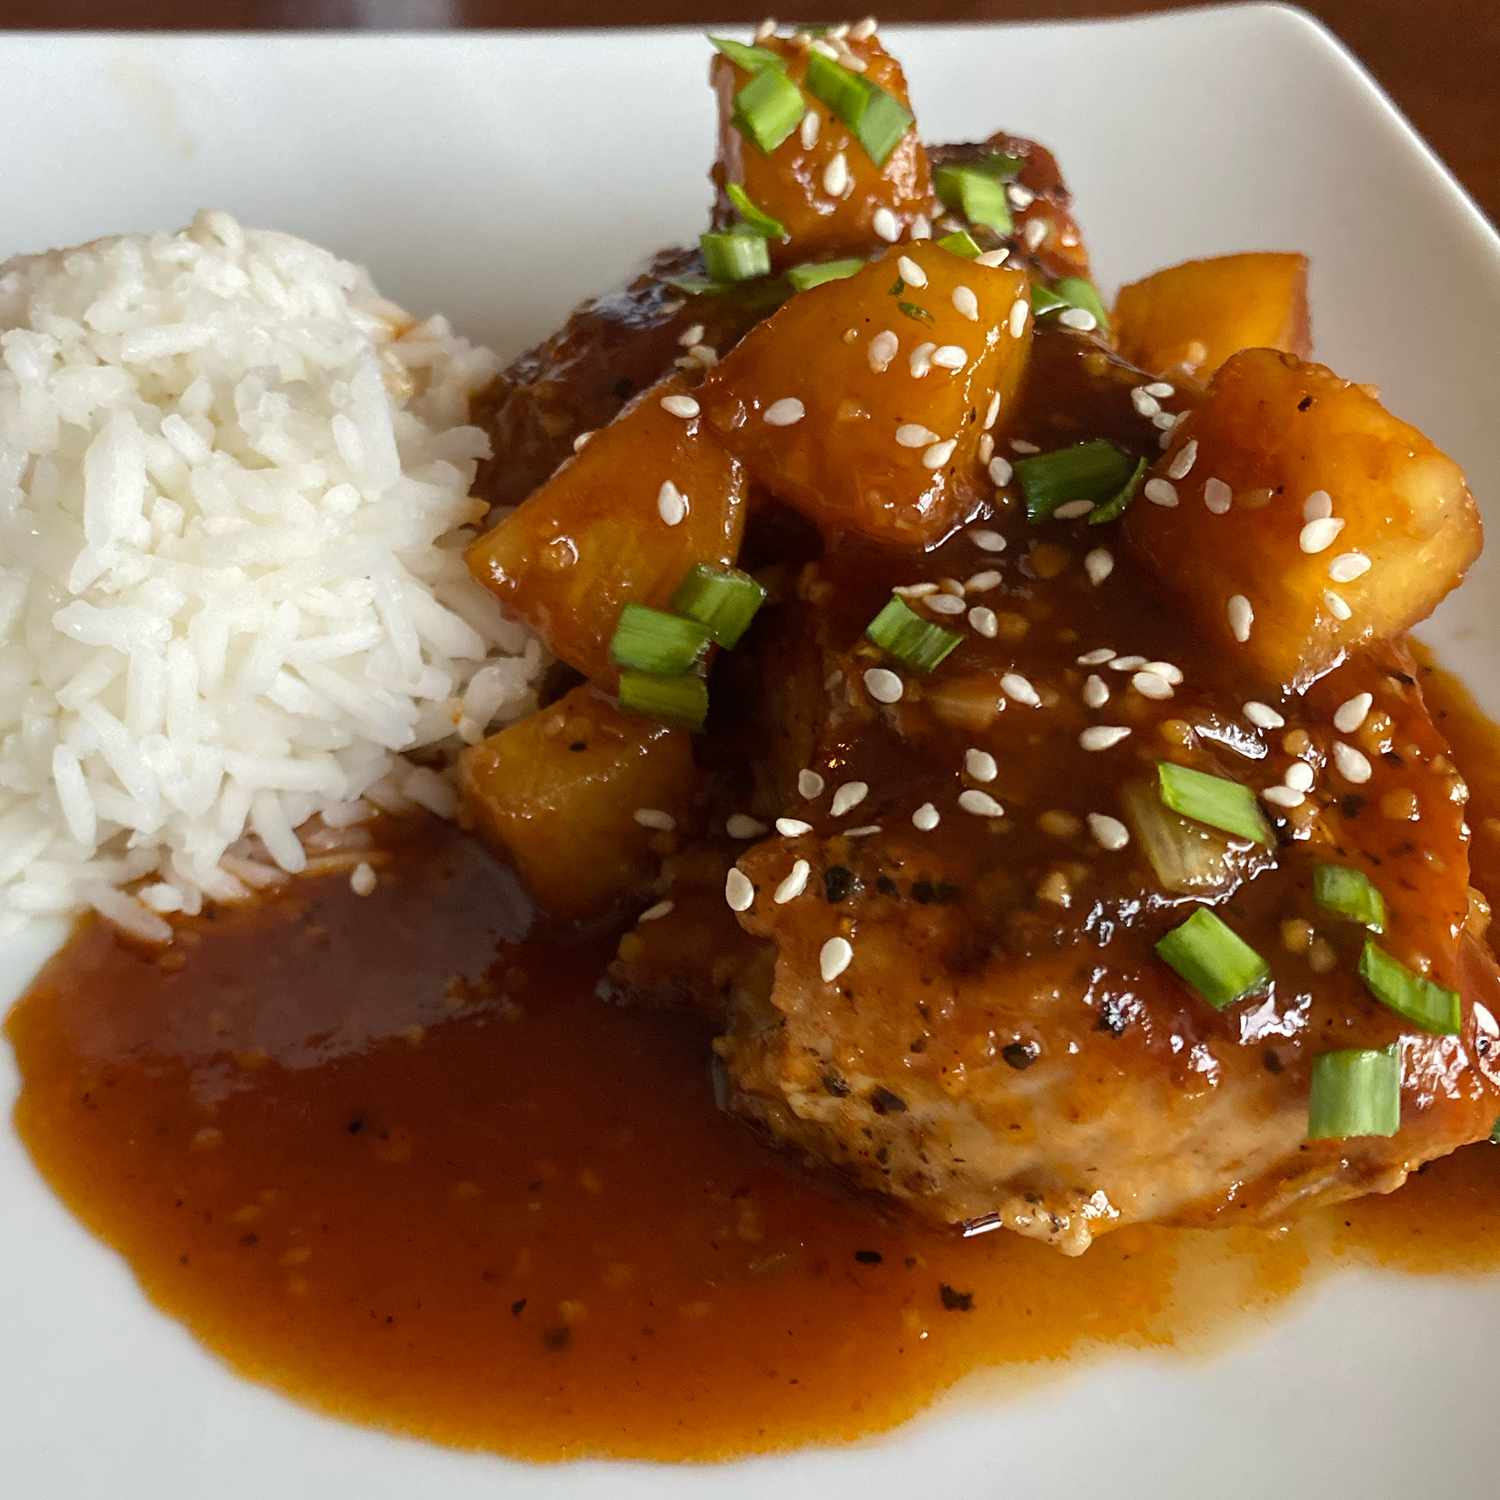 close up view of Sweet and Sour Pork Tenderloin with pineapple piece, green onions, and sesame seeds, served with white rice on a white plate